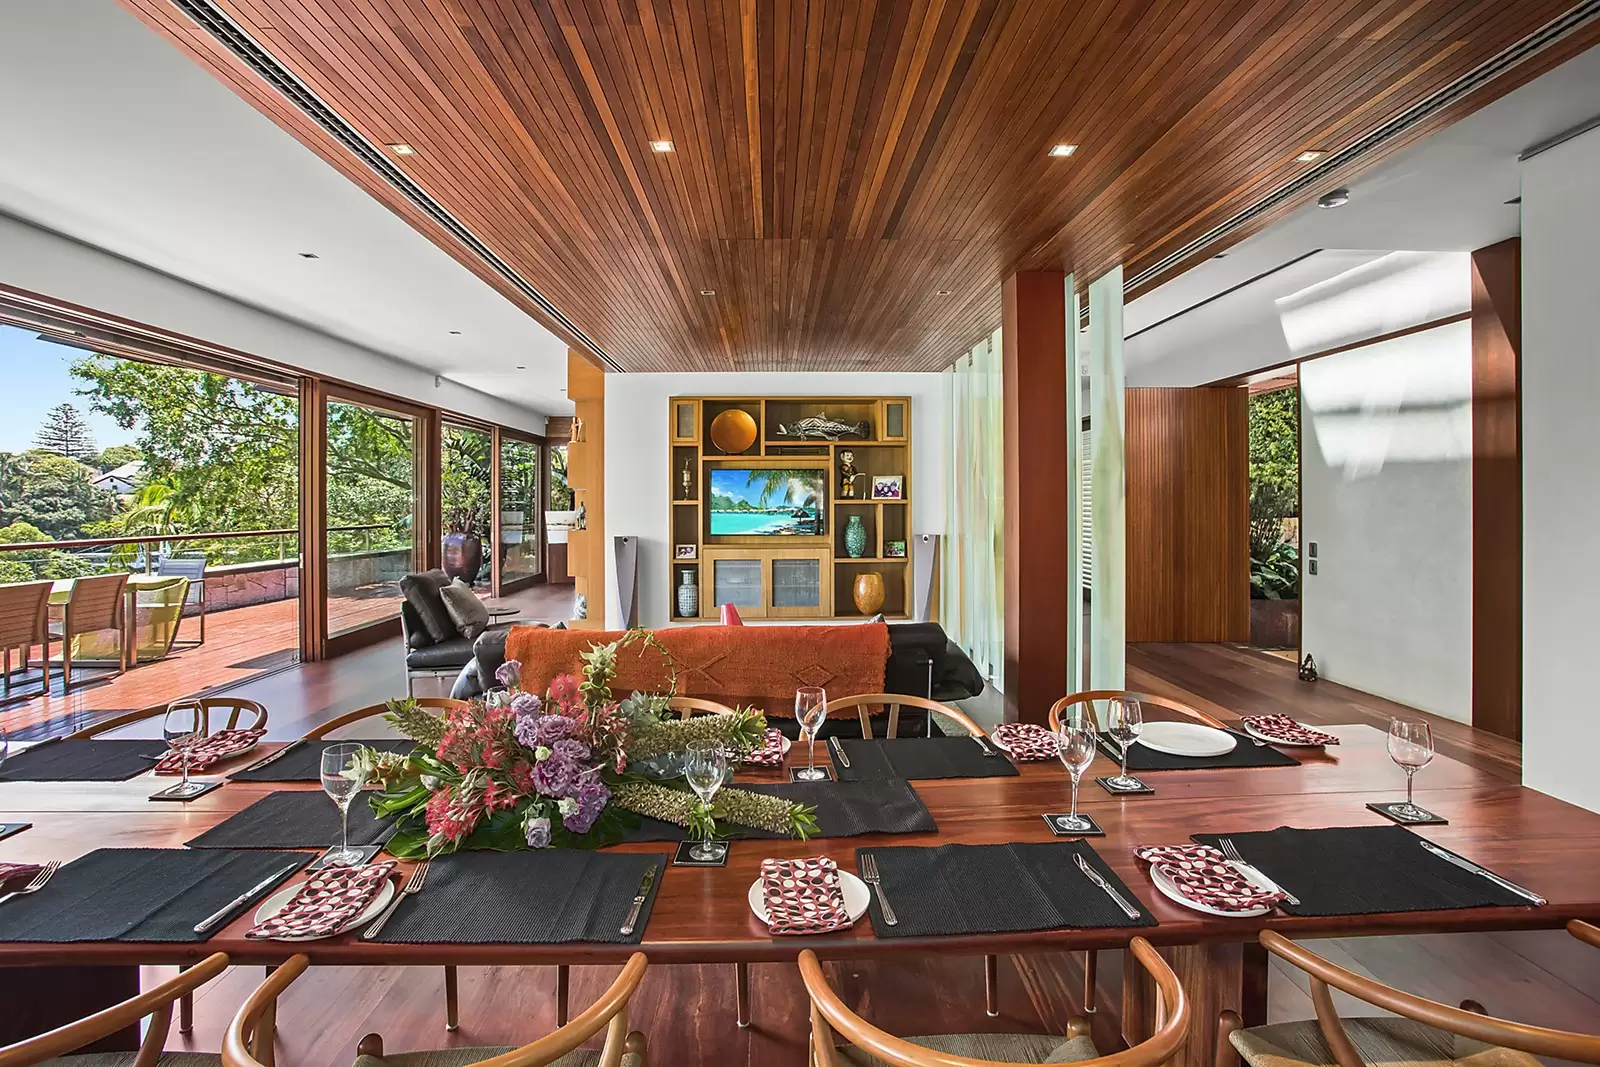 Photo #6: 8 The Crescent, Vaucluse - Sold by Sydney Sotheby's International Realty